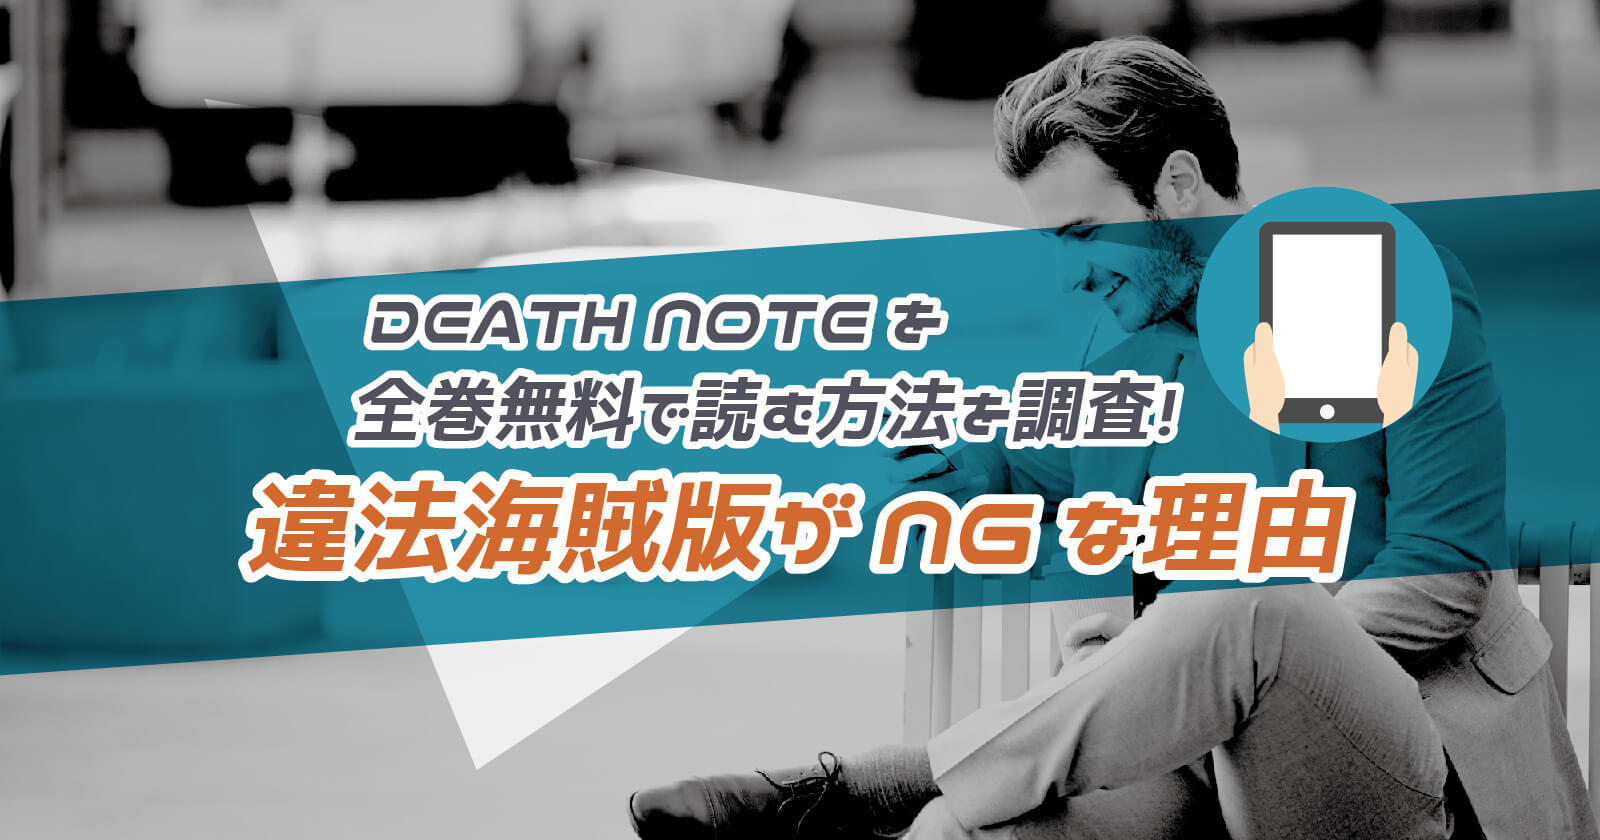 Death Note デスノート を全巻無料で読む方法を調査 漫画バンクや漫画ロウがngな理由 To Be Soldout